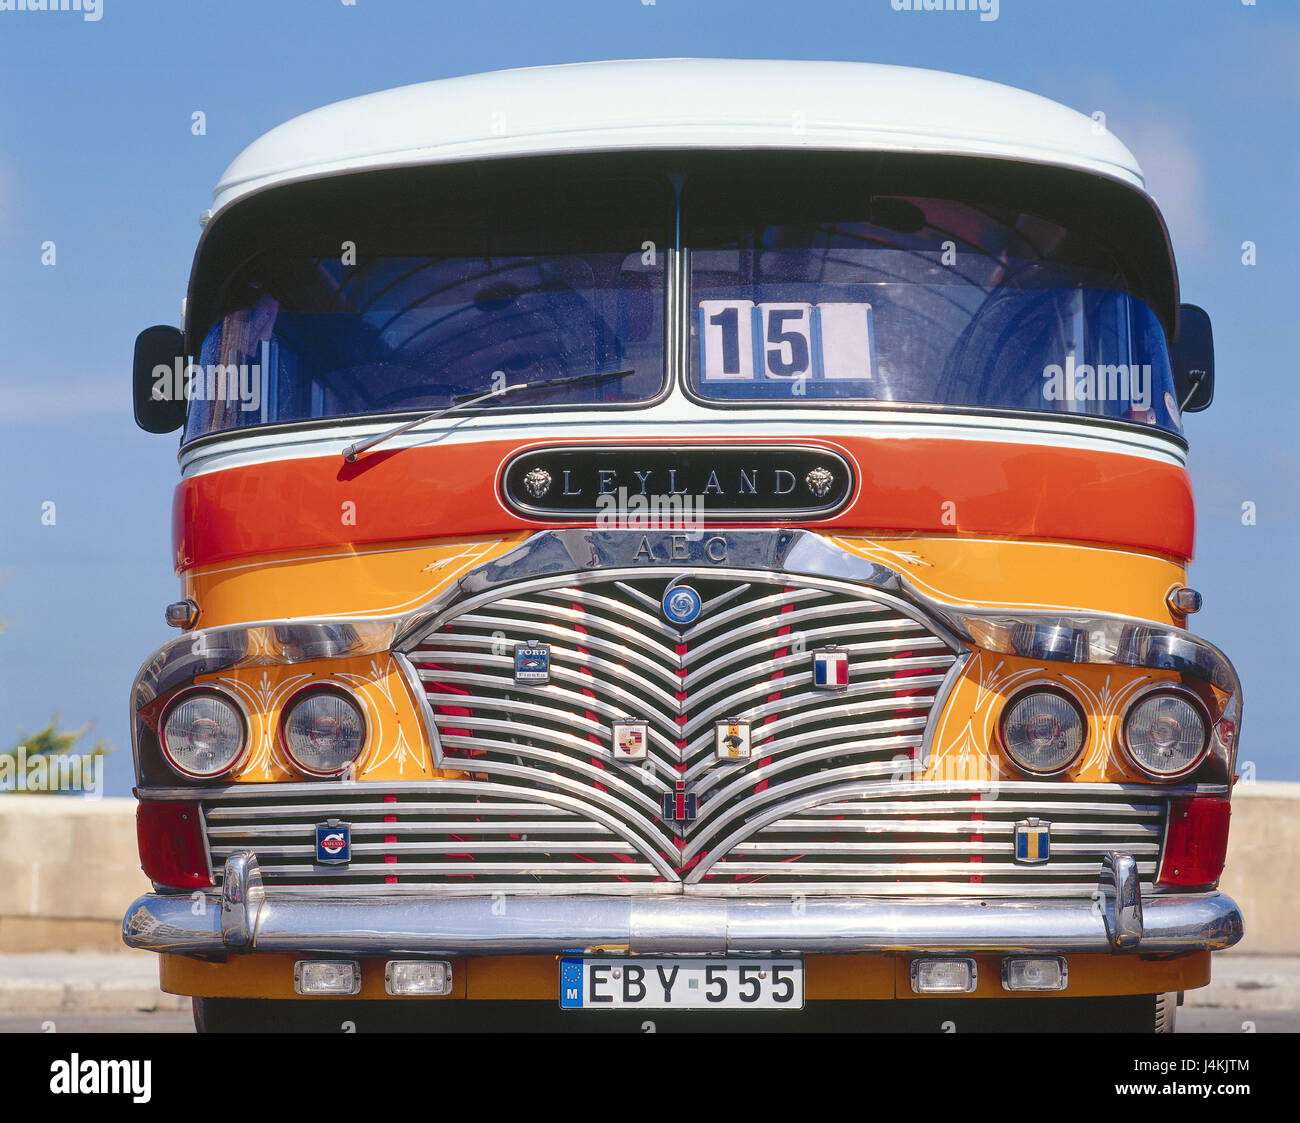 Island Malta, coach, Leyland, AEC, front view island state, Mediterranean island, Maltese islands, bus, regular bus, public transit, publicly, vehicle, personal transport, means of transportation, passenger traffic, old-timer, typically, bonnet, windscreen, radiator grille Stock Photo